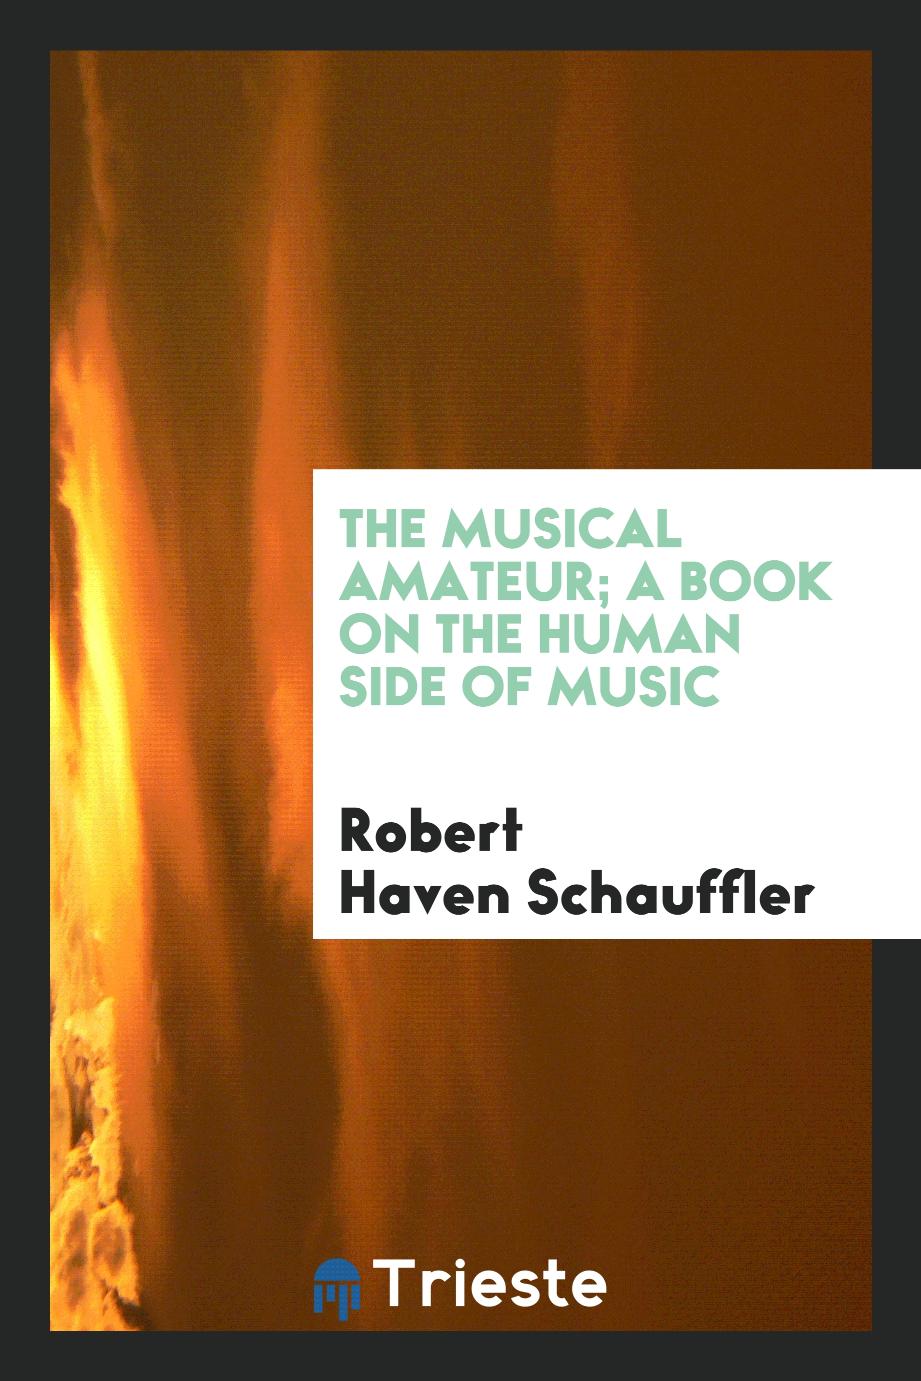 The musical amateur; a book on the human side of music